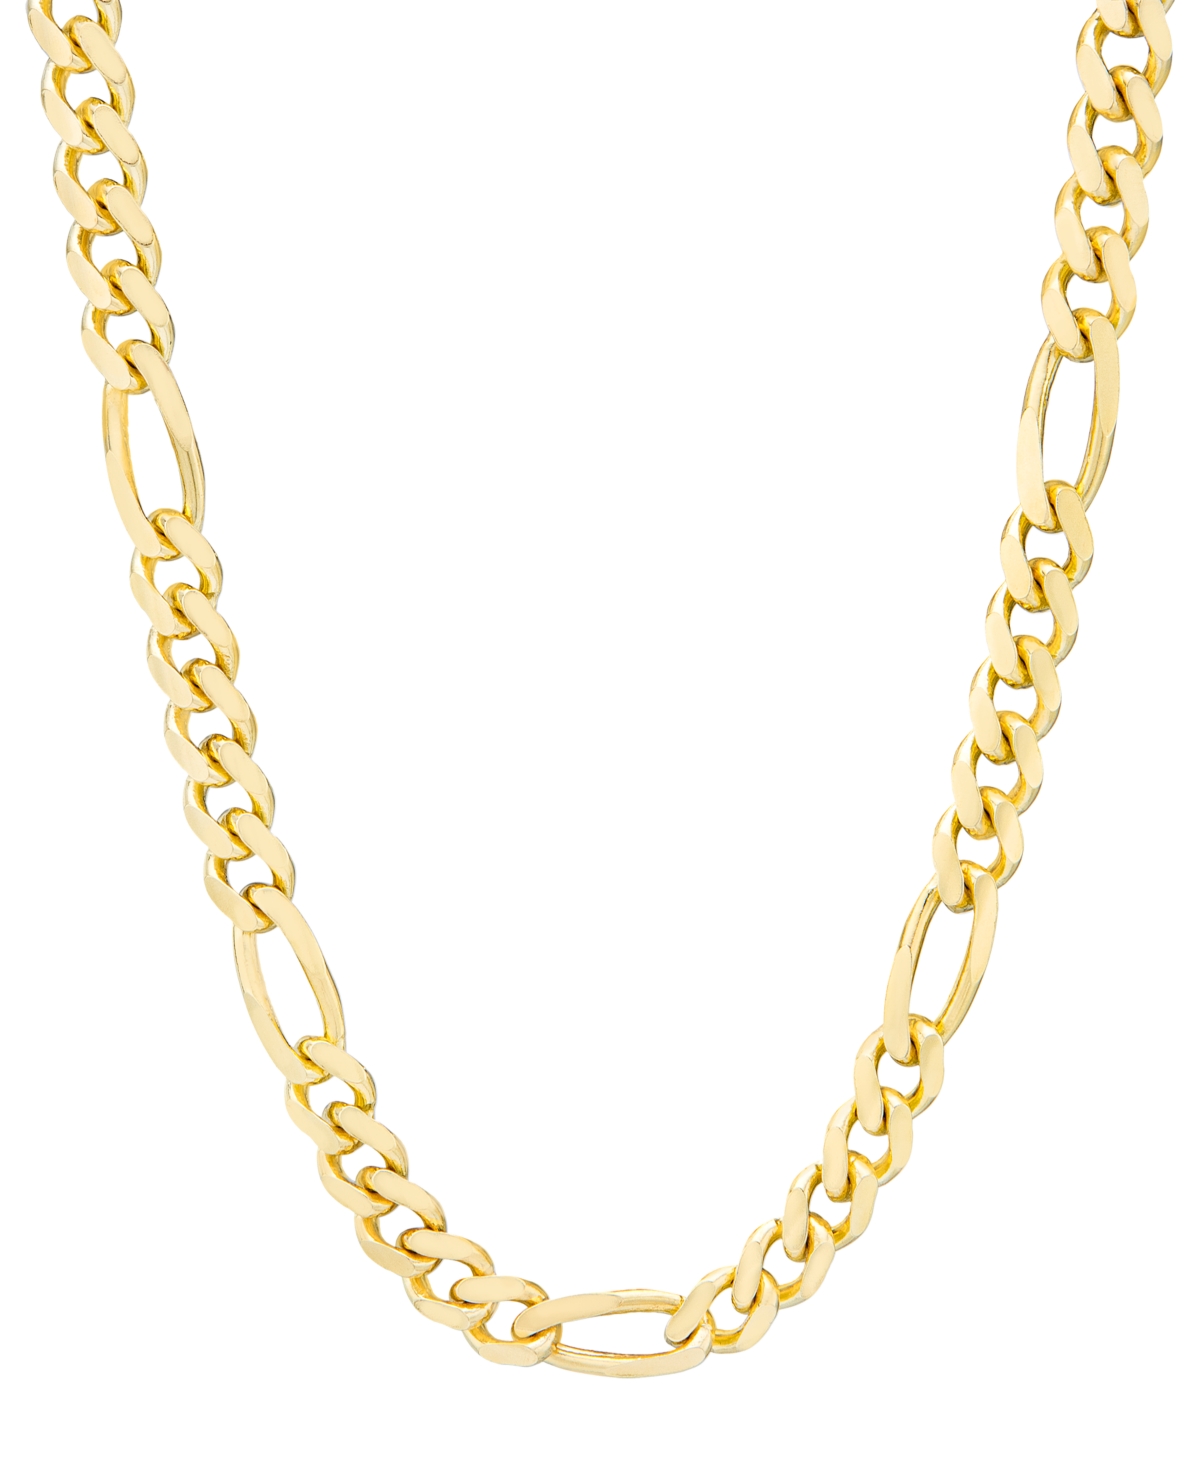 Men's Figaro Link 22" Chain Necklace in 14k Gold-Plated Sterling Silver - Gold Over Silver